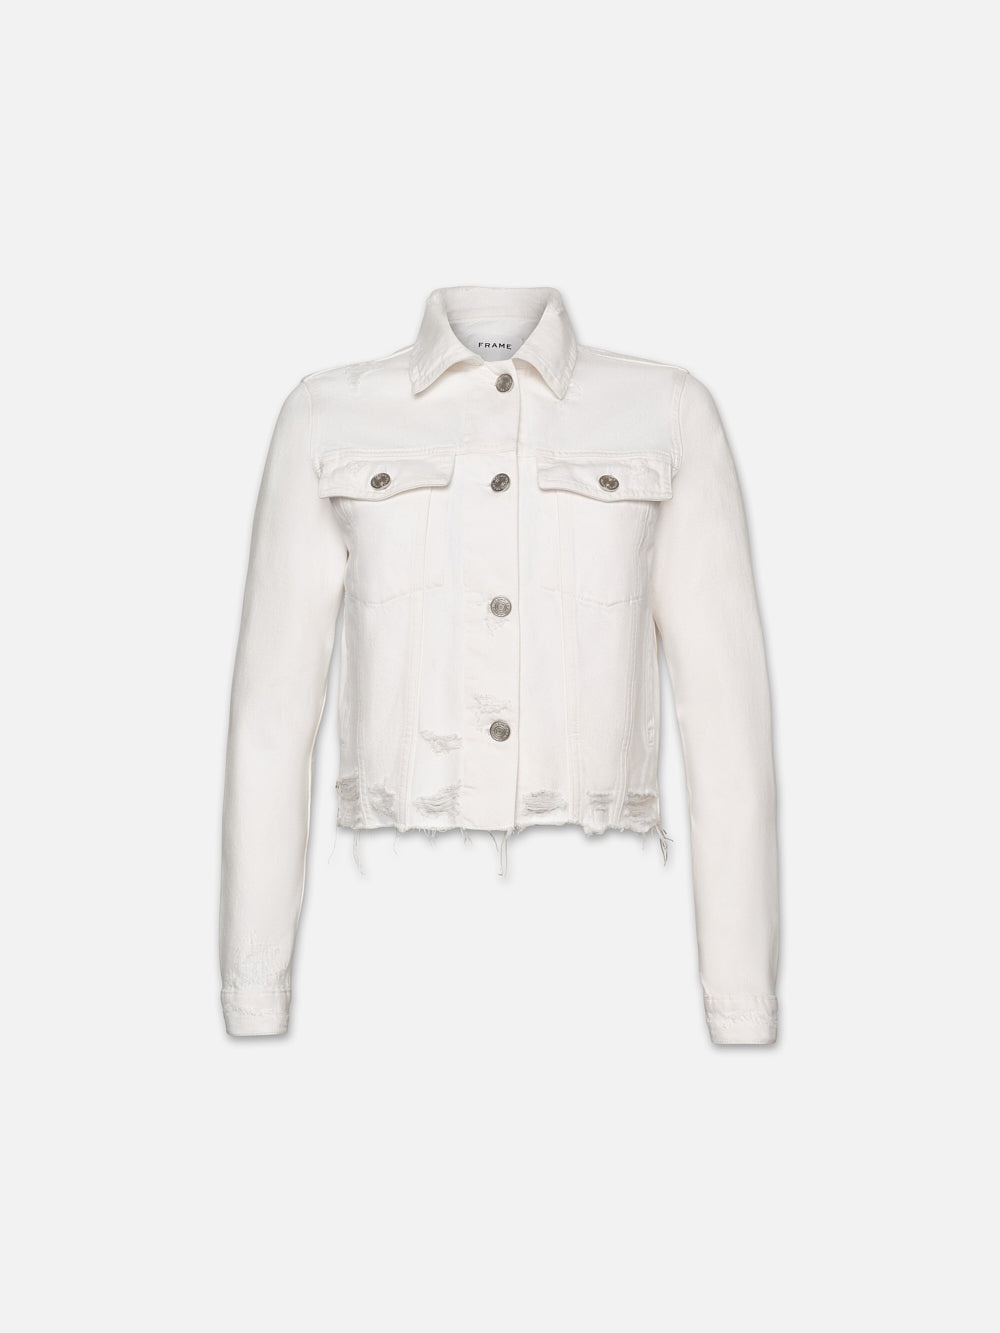 Le Vintage Jacket in White Rips - 1